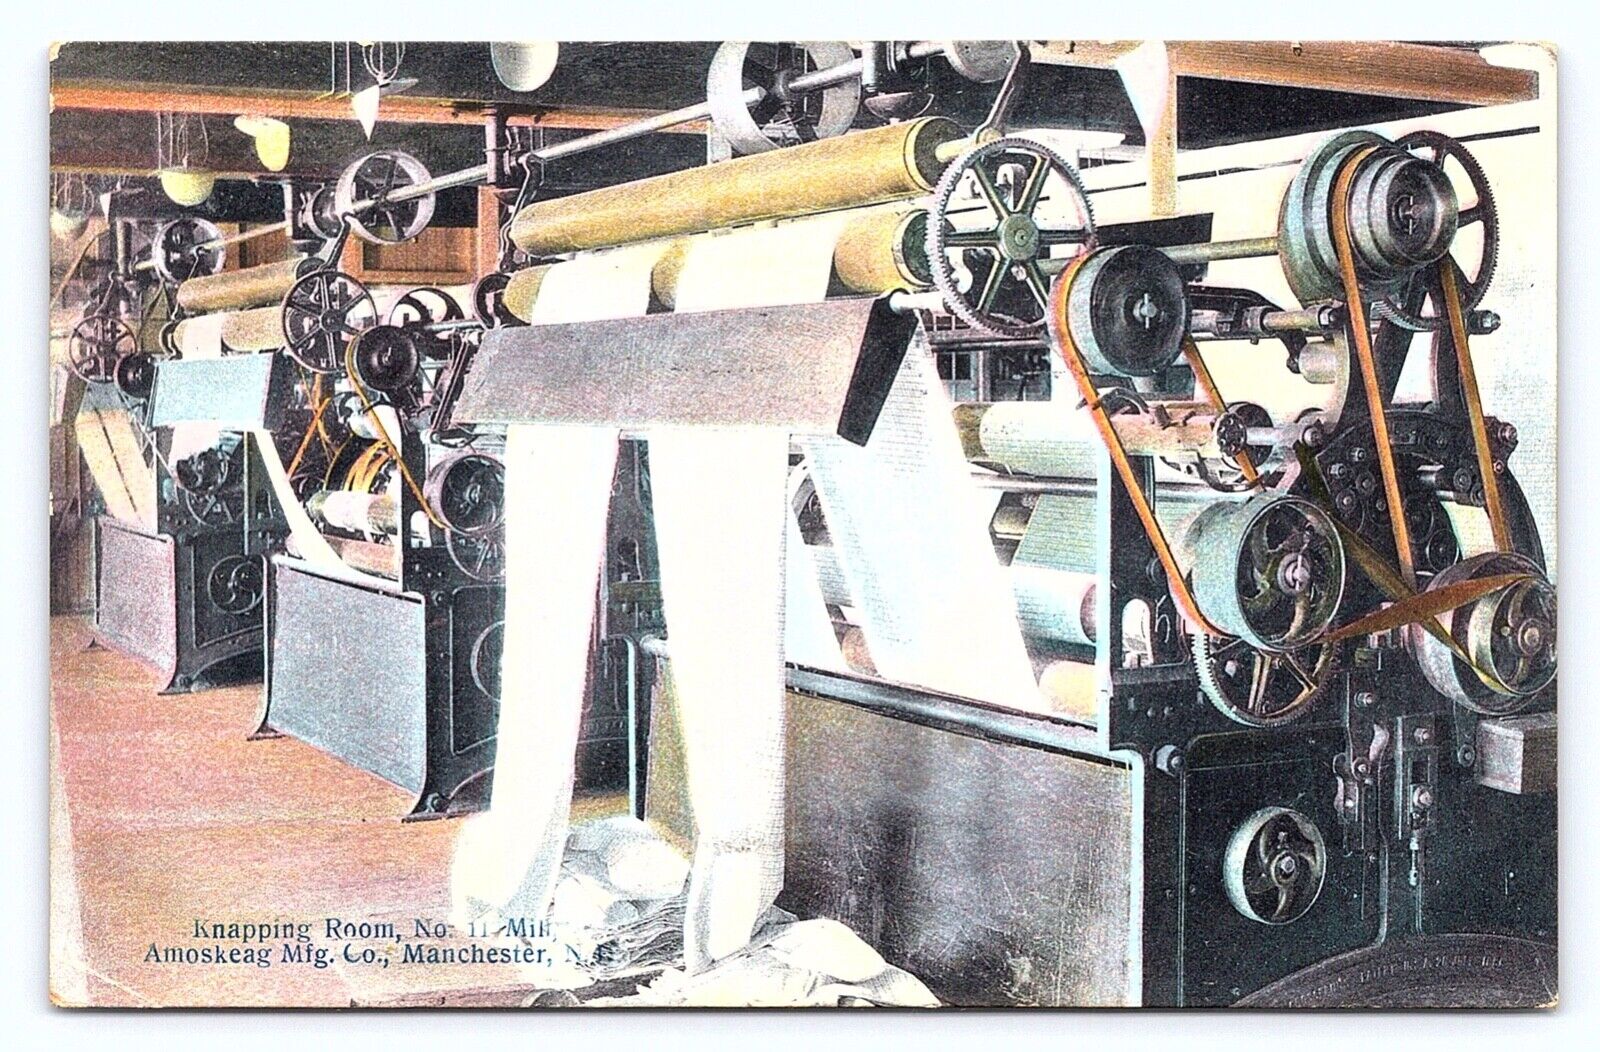 Manchester NH 1912 Knapping Room Amoskeag Mfg Mill No 11 Factory Postcard D26